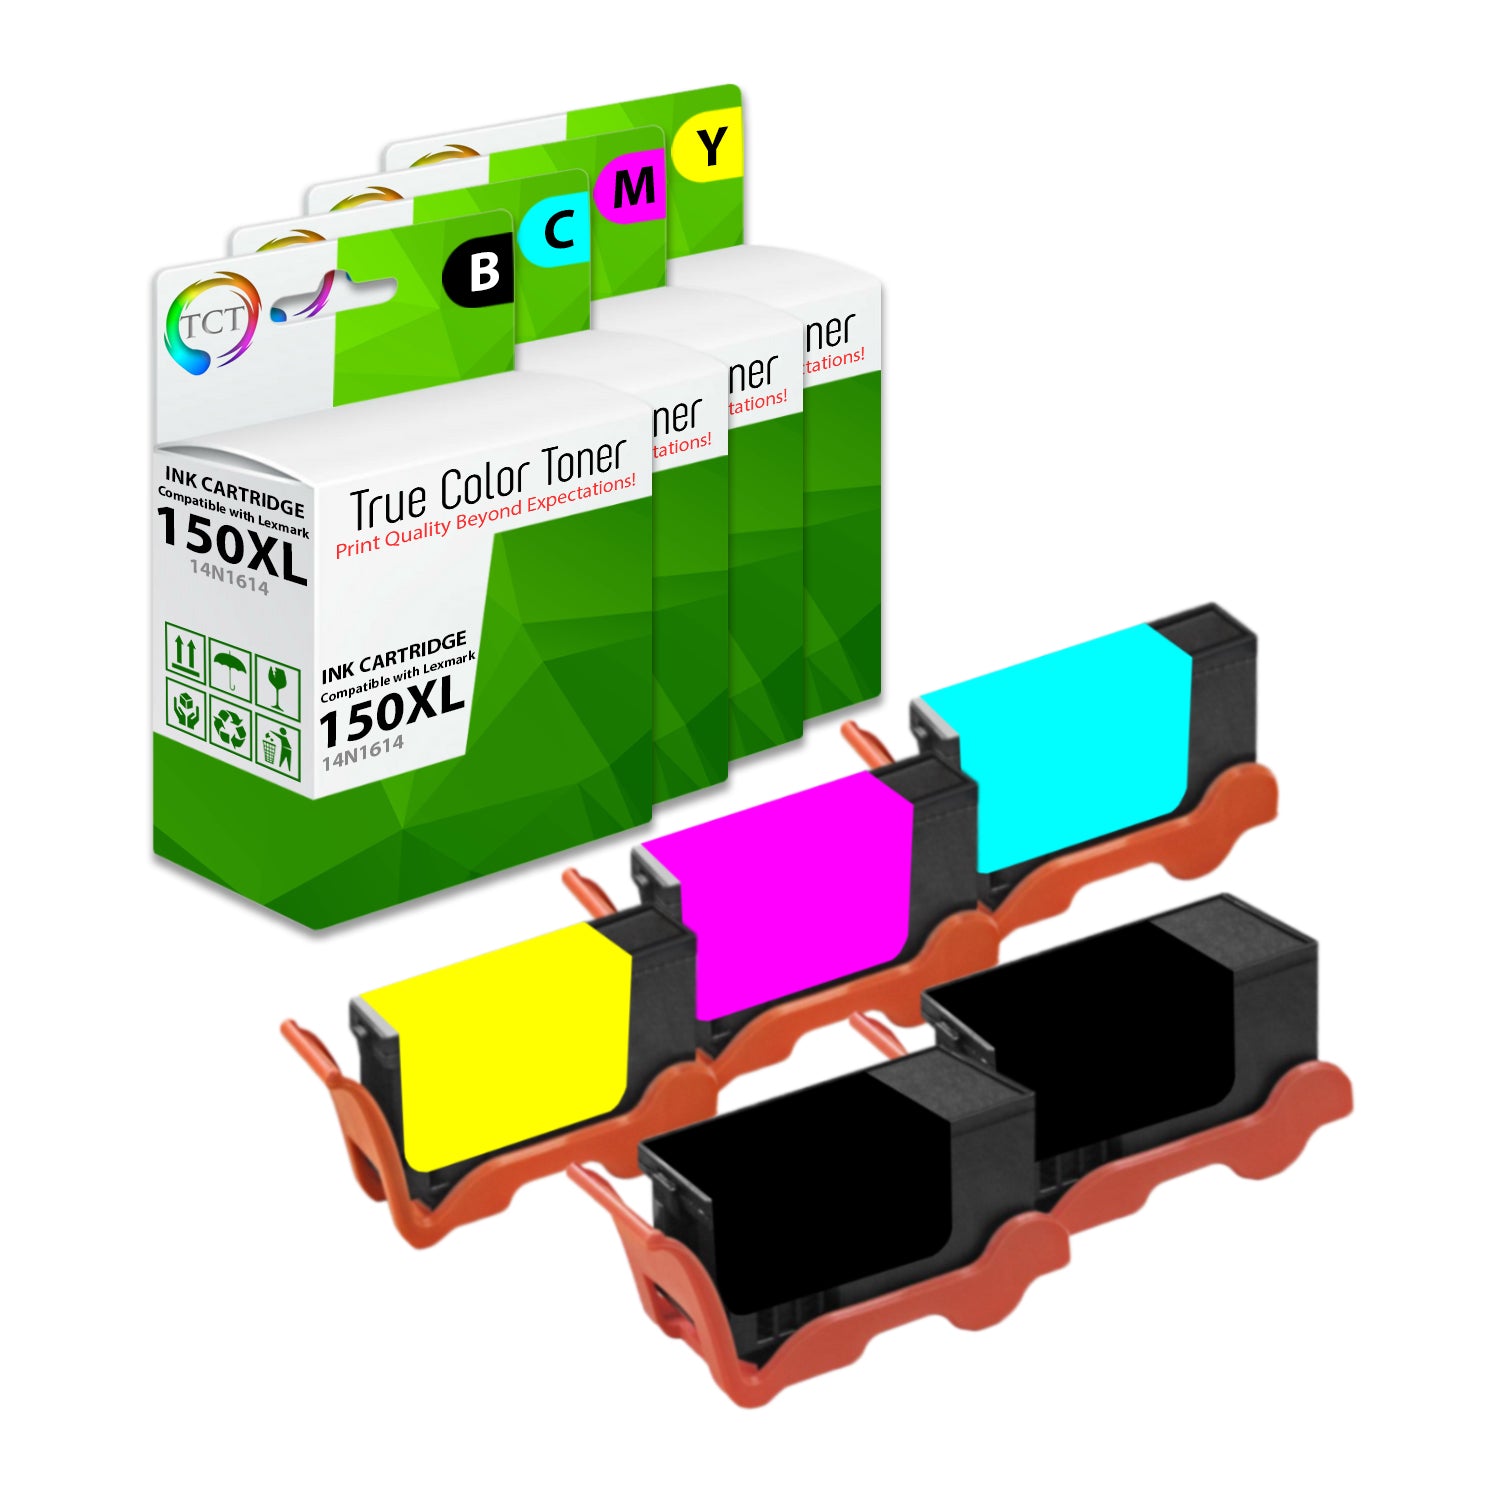 TCT Remanufactured HY Ink Cartridge Replacement for the Lexmark 150XL Series - 5 Pack (B, C, M, Y)